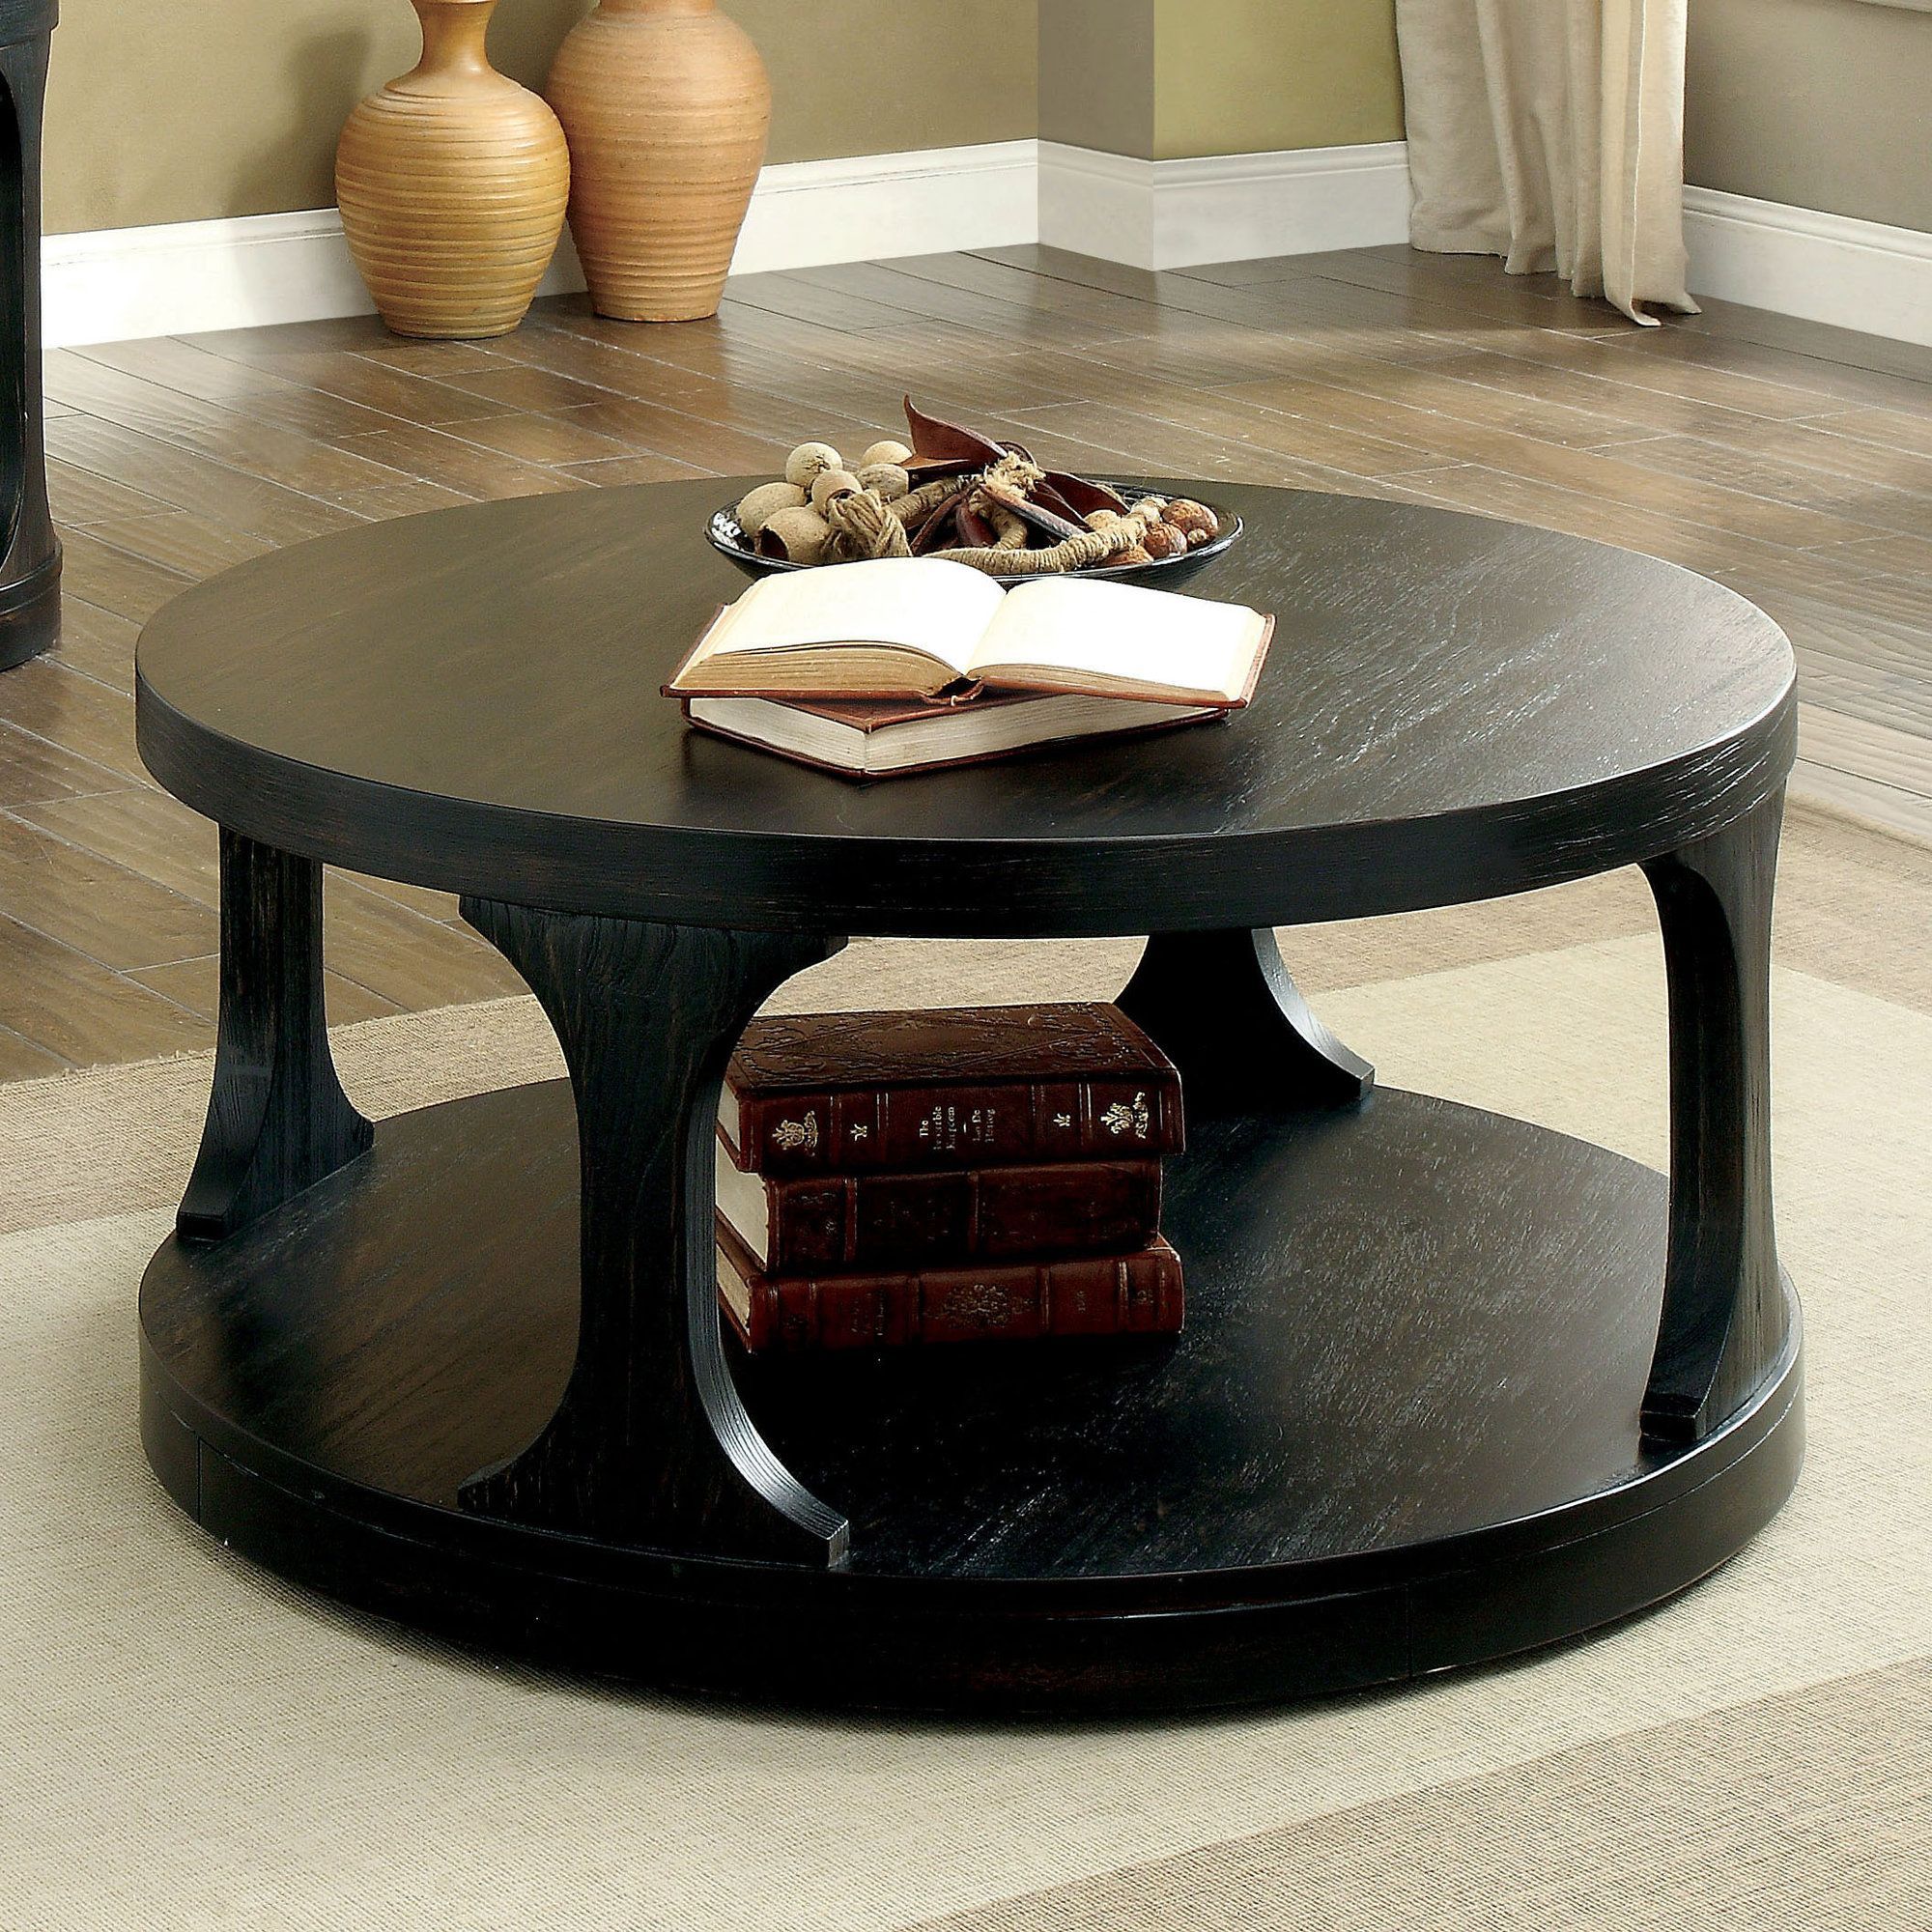 Bring A Touch Of Elegance To Your Home With A Black Circle Coffee Table Within Full Black Round Coffee Tables (View 11 of 15)